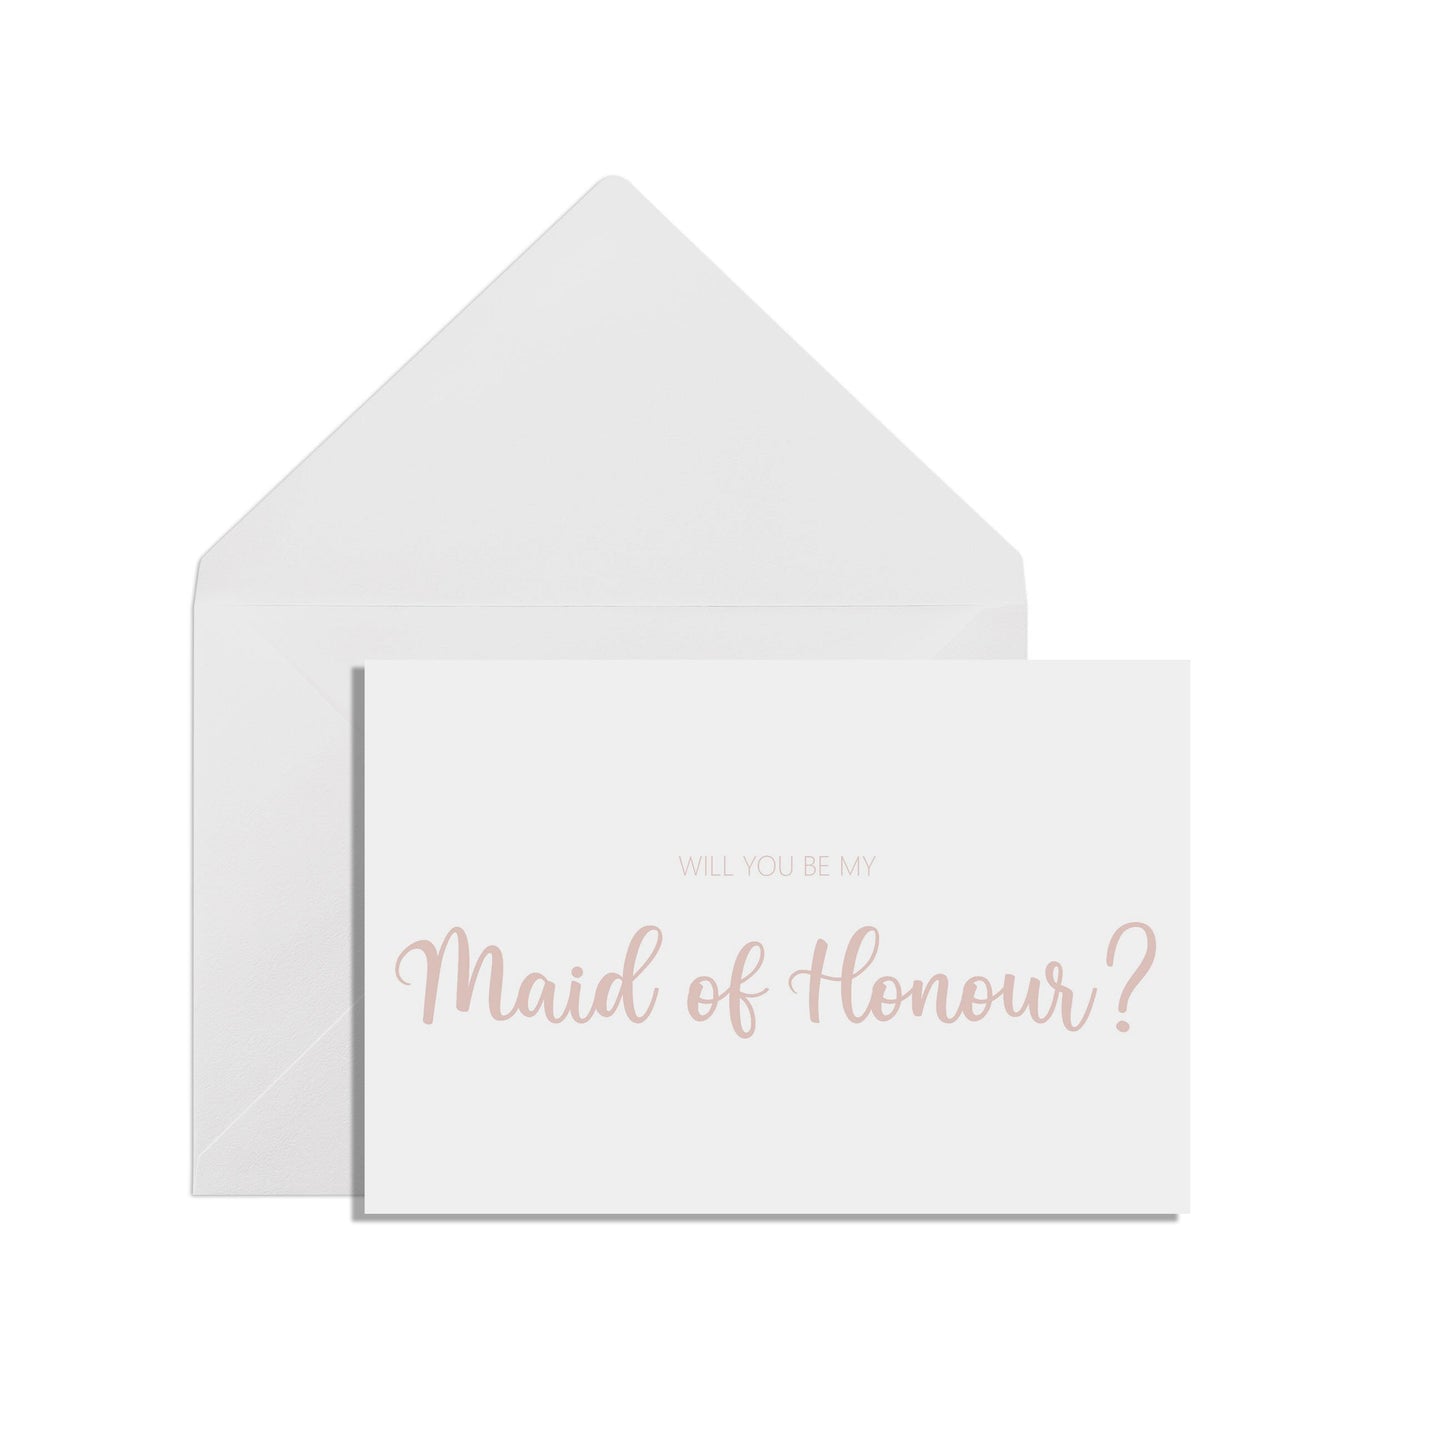 Will You Be My Maid Of Honour?, A6 Rose Gold Effect Proposal Card With White Envelope